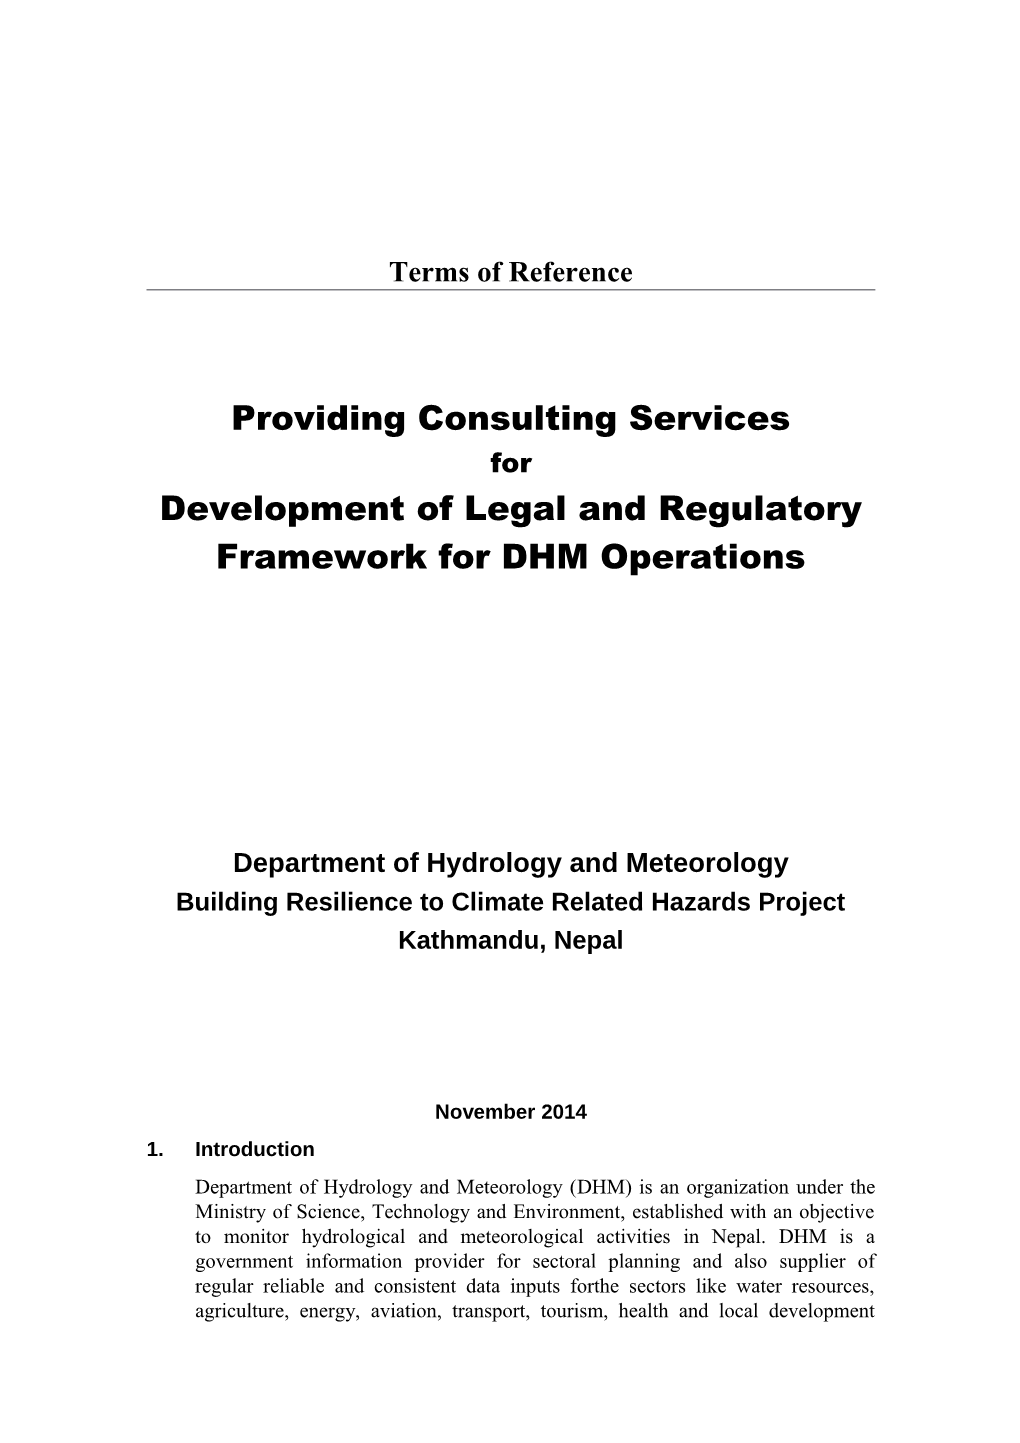 Providing Consulting Services for Development of Legal & Regulatory Framework for DHM